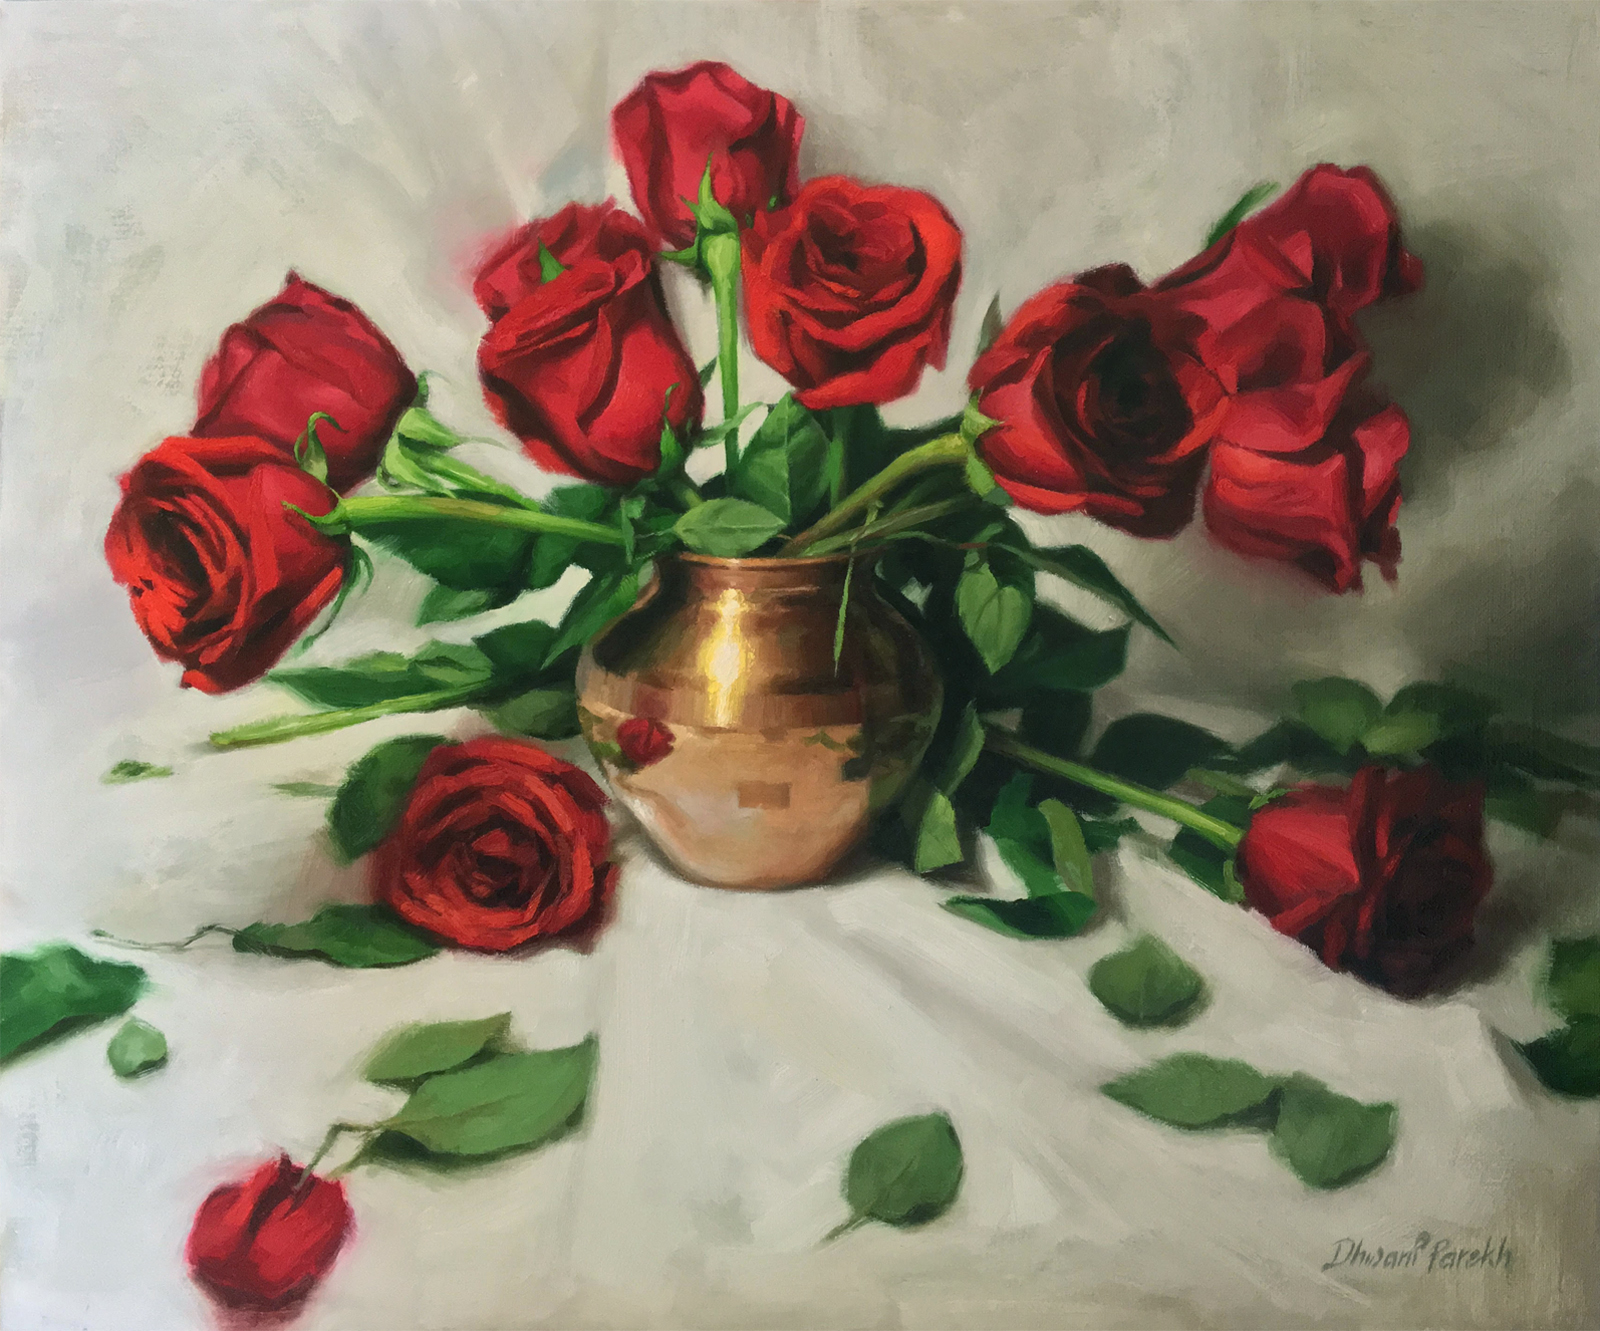  Red Roses  24 x 20  Oil on Canvas 